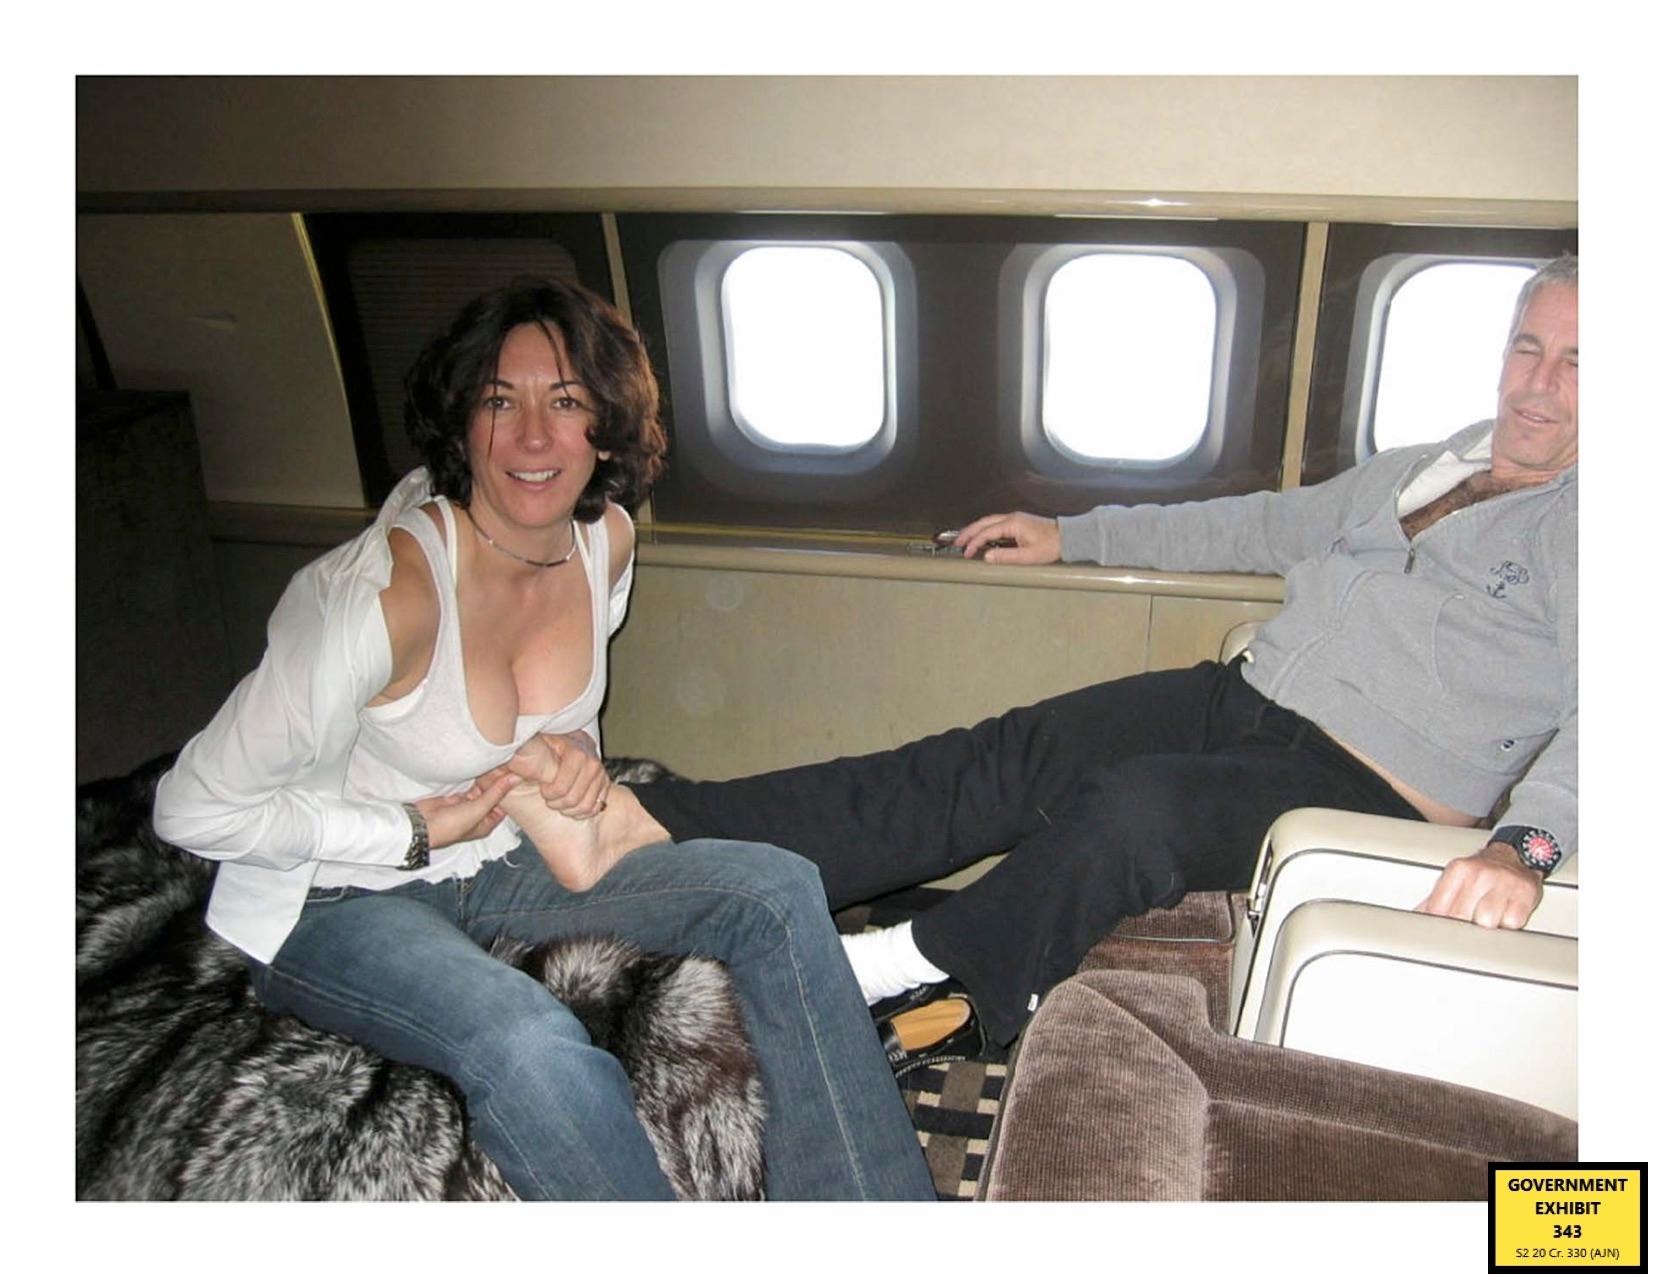 Sleazy never-before-seen photos of Ghislaine Maxwell giving Epstein foot rubs on Lolita Express and sunbathing on yachts among treasure trove of new evidence shown in sex trafficking trial